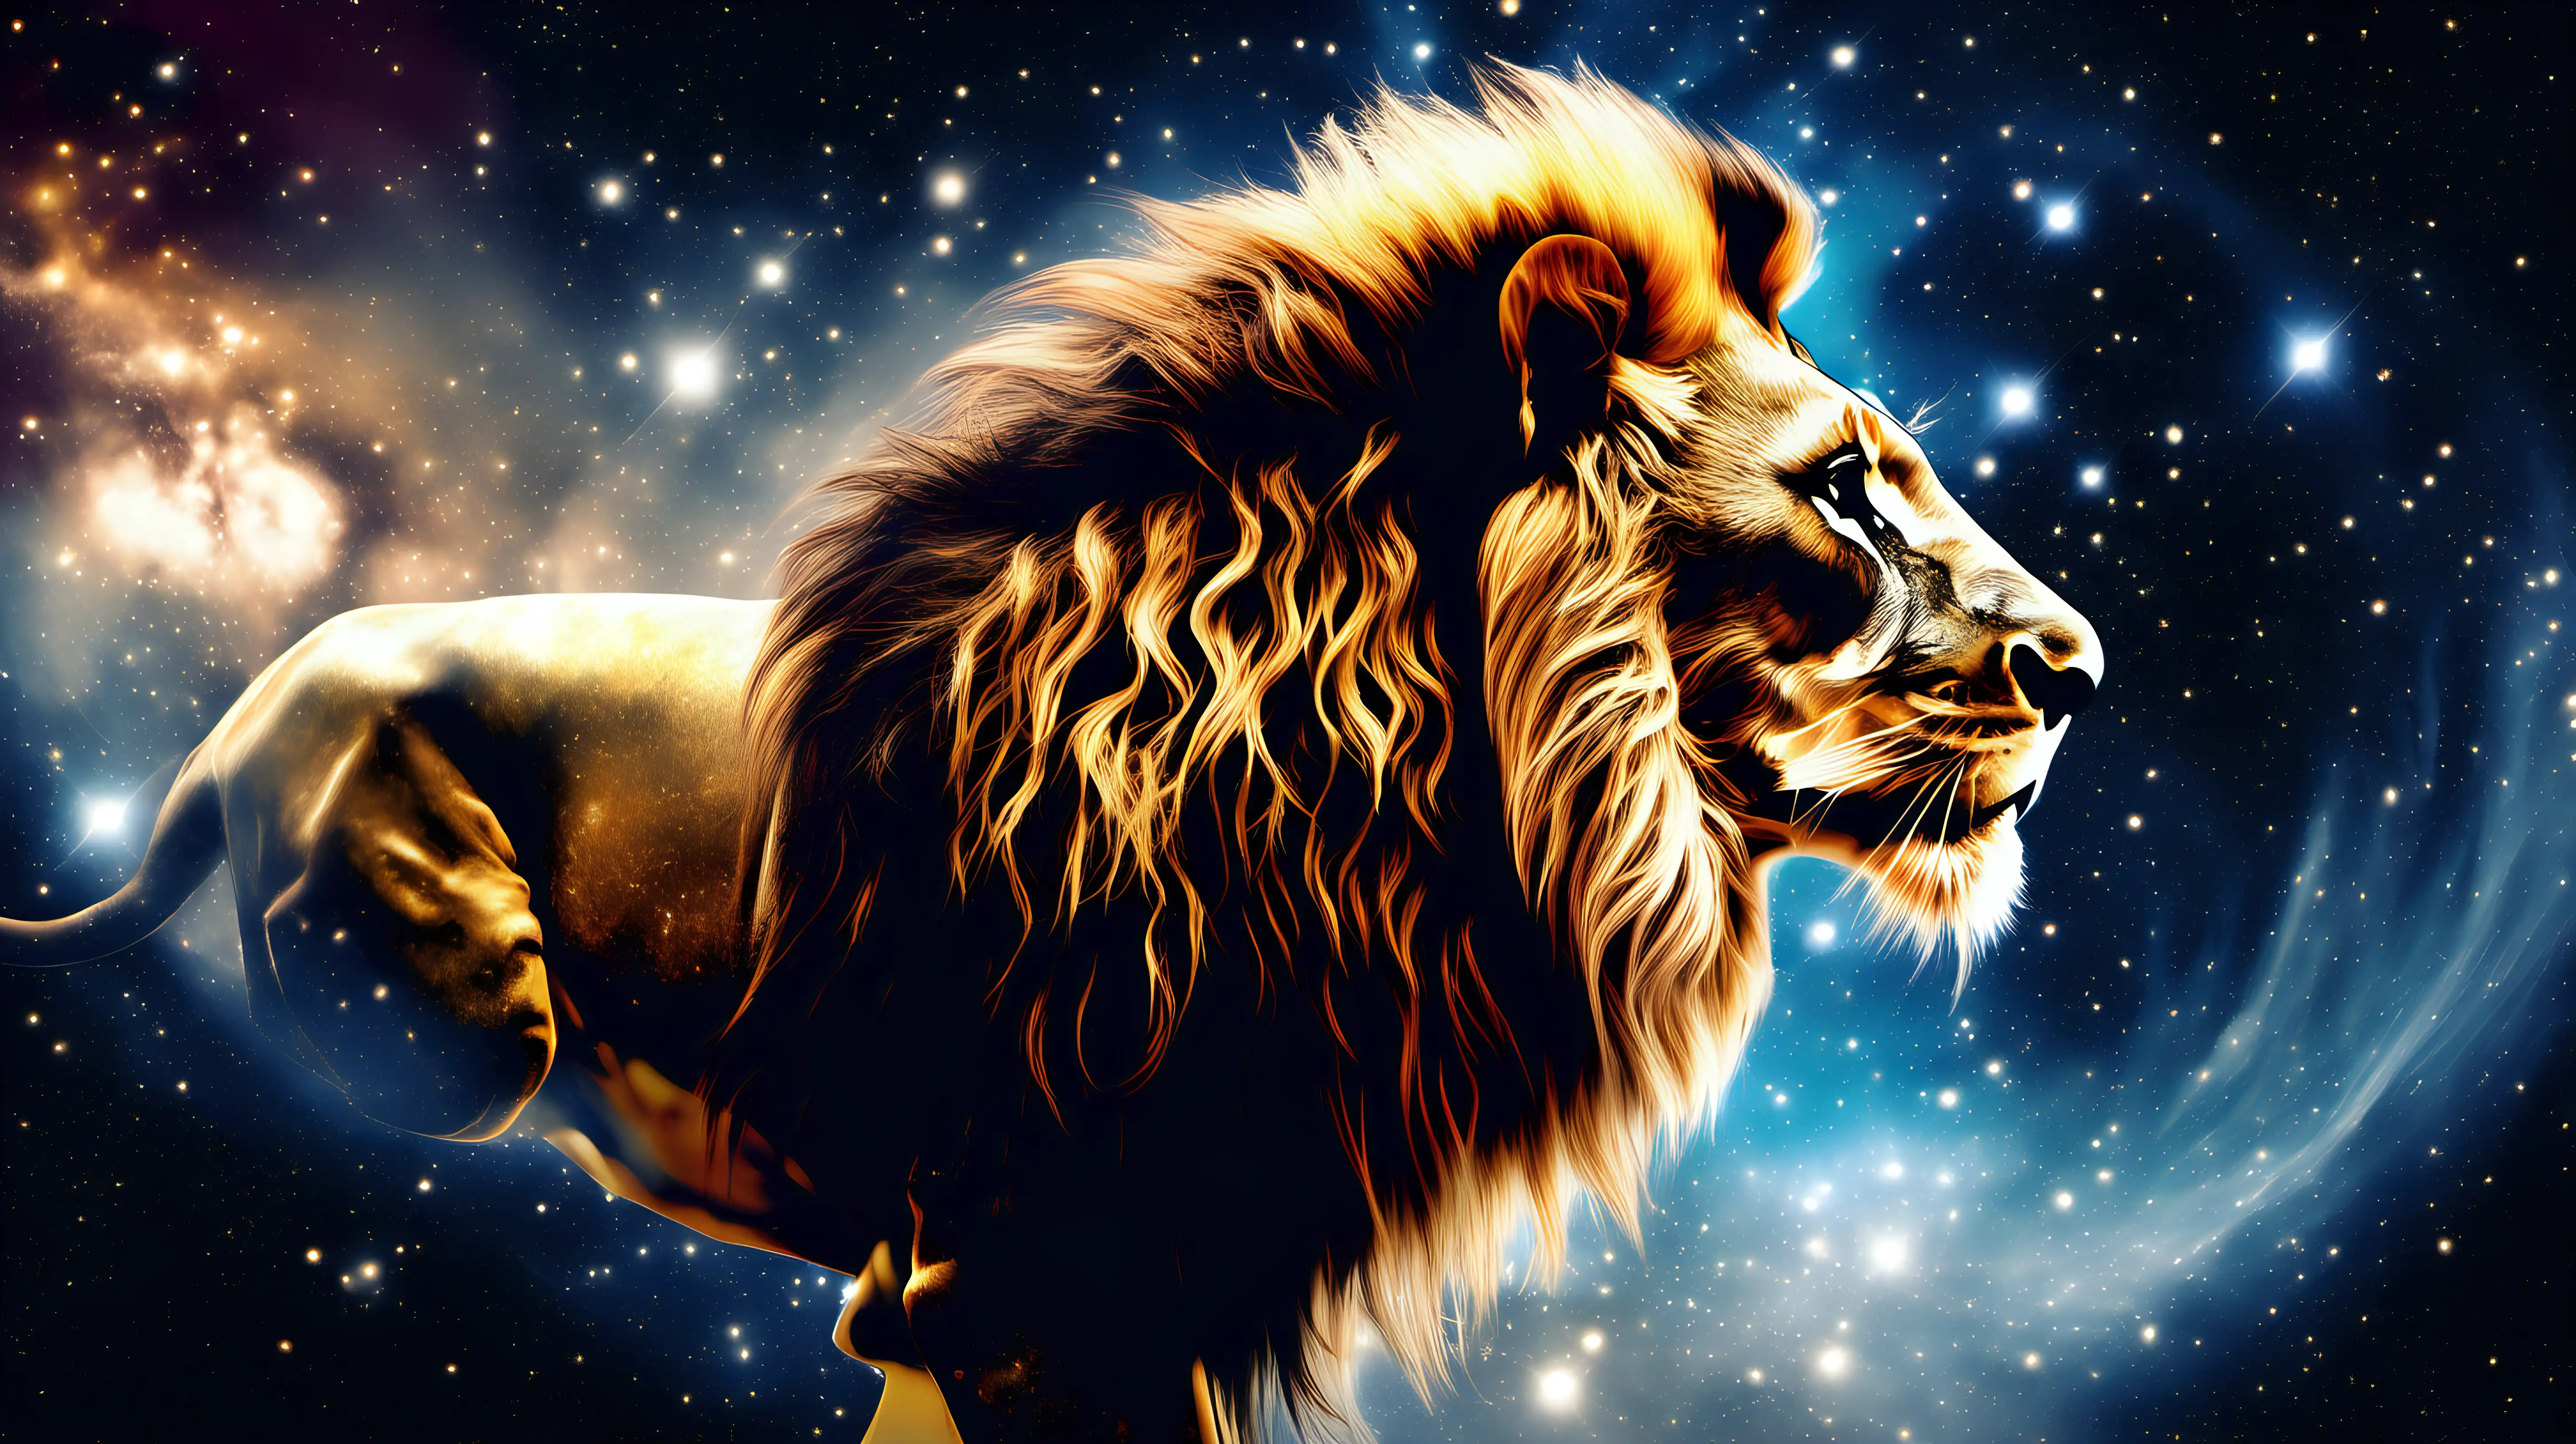 "Design a lion in a dynamic leap, leaving behind a trail of stardust as it transcends the boundaries between Earth and the cosmos, embodying the limitless spirit of exploration."